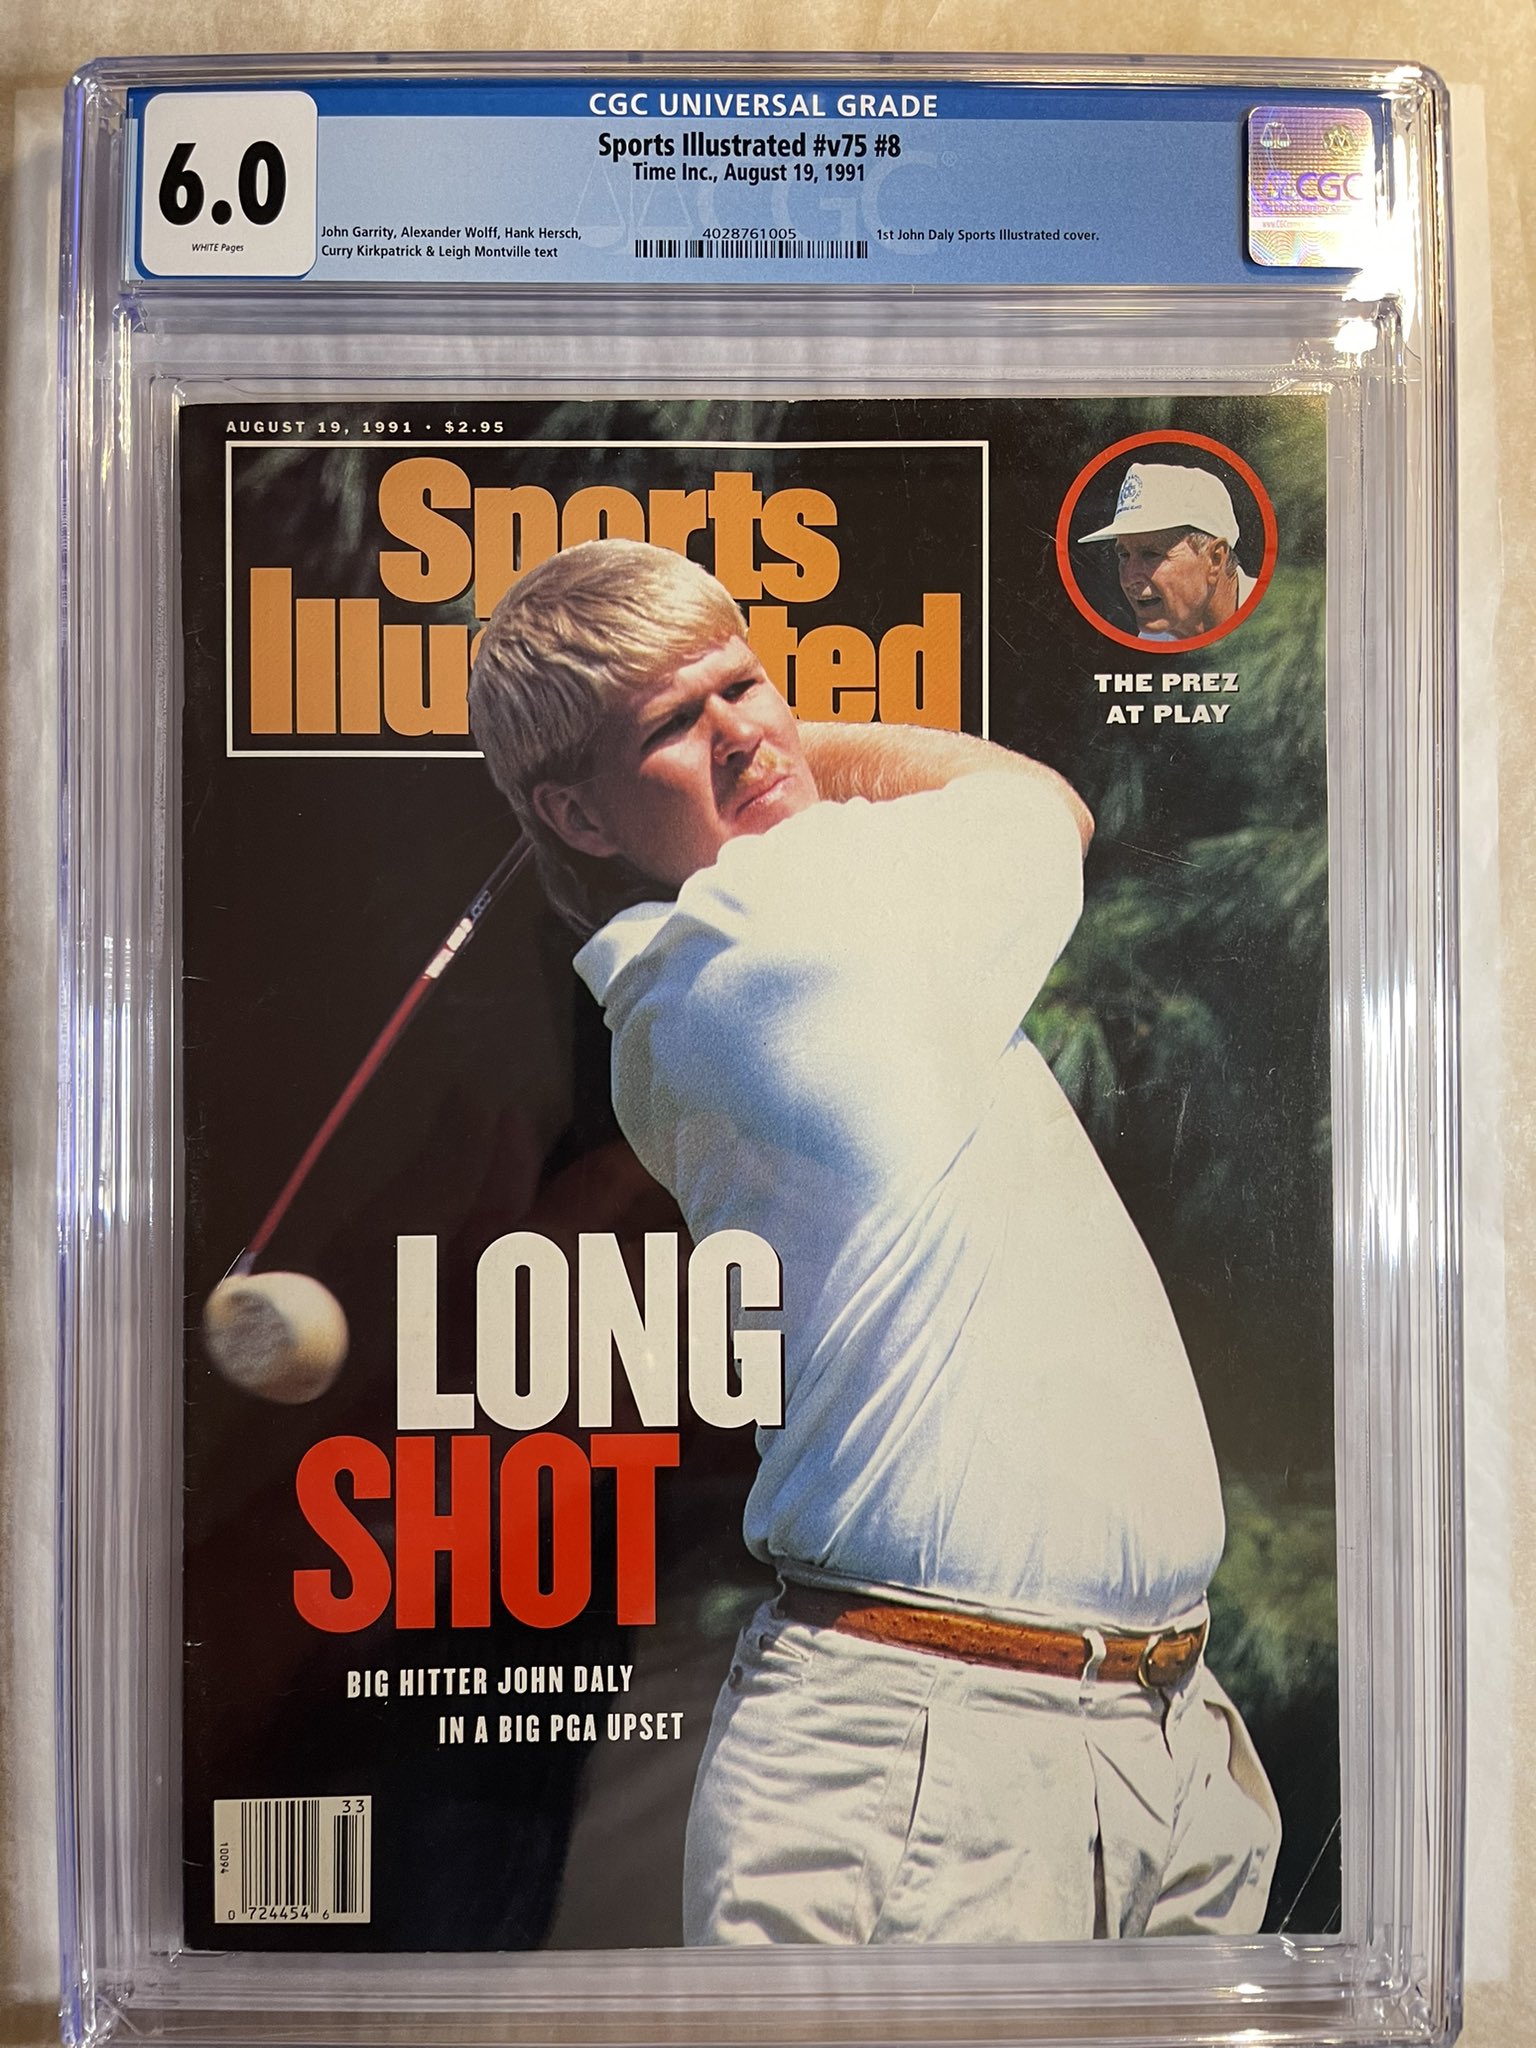 Happy 57th birthday to John Daly!  This is his 1st Sports Illustrated cover from 1991 graded at 6.0.  